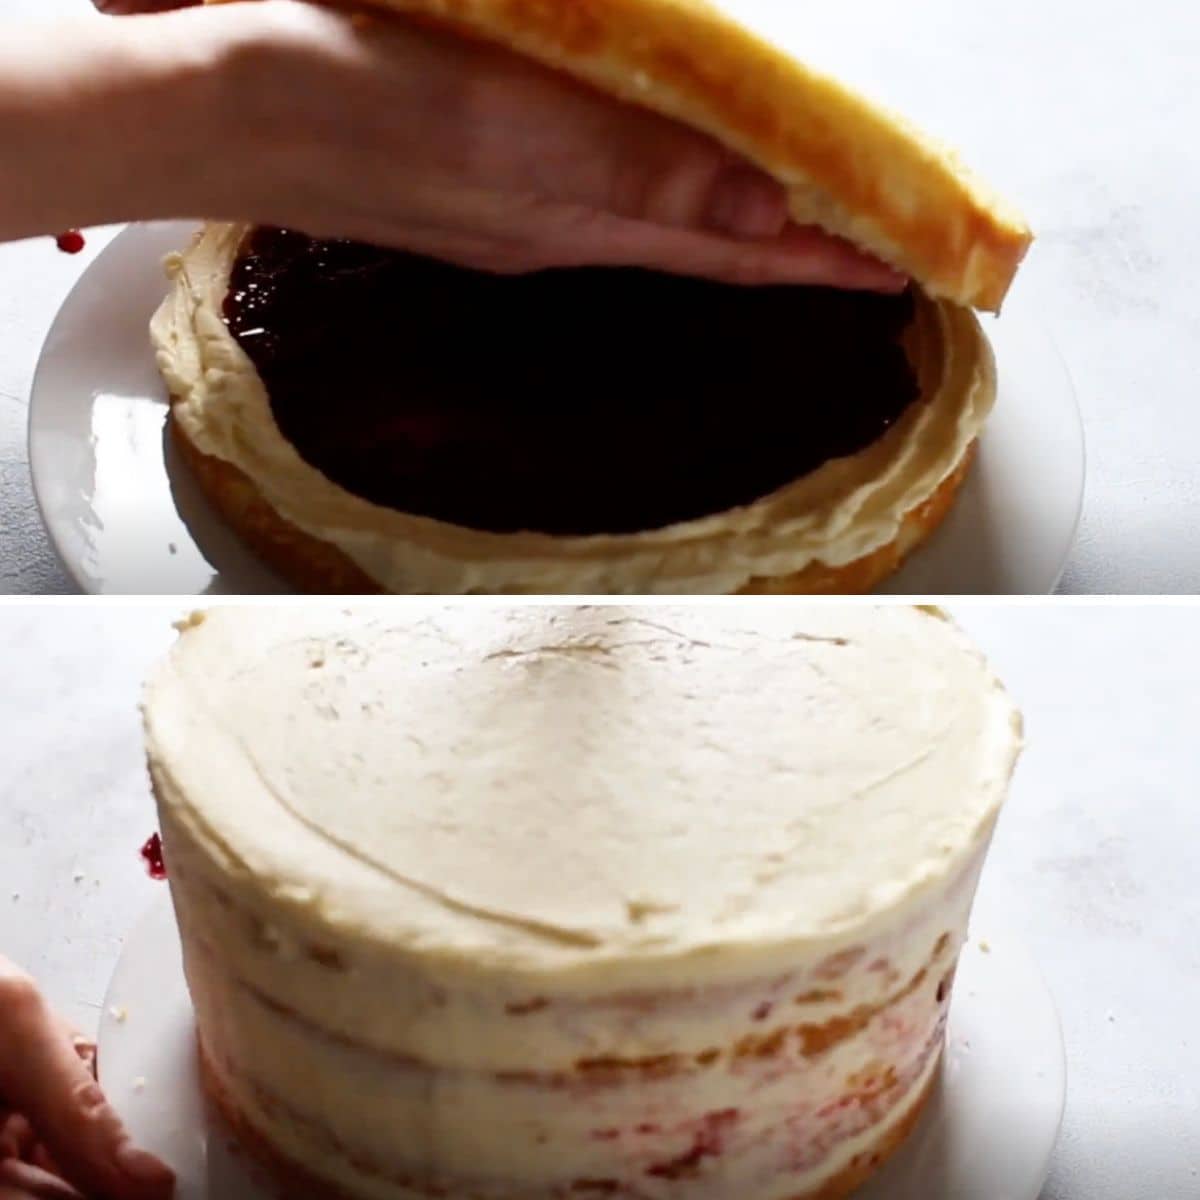 Adding the layers and the cake when it's frosted when assembled.